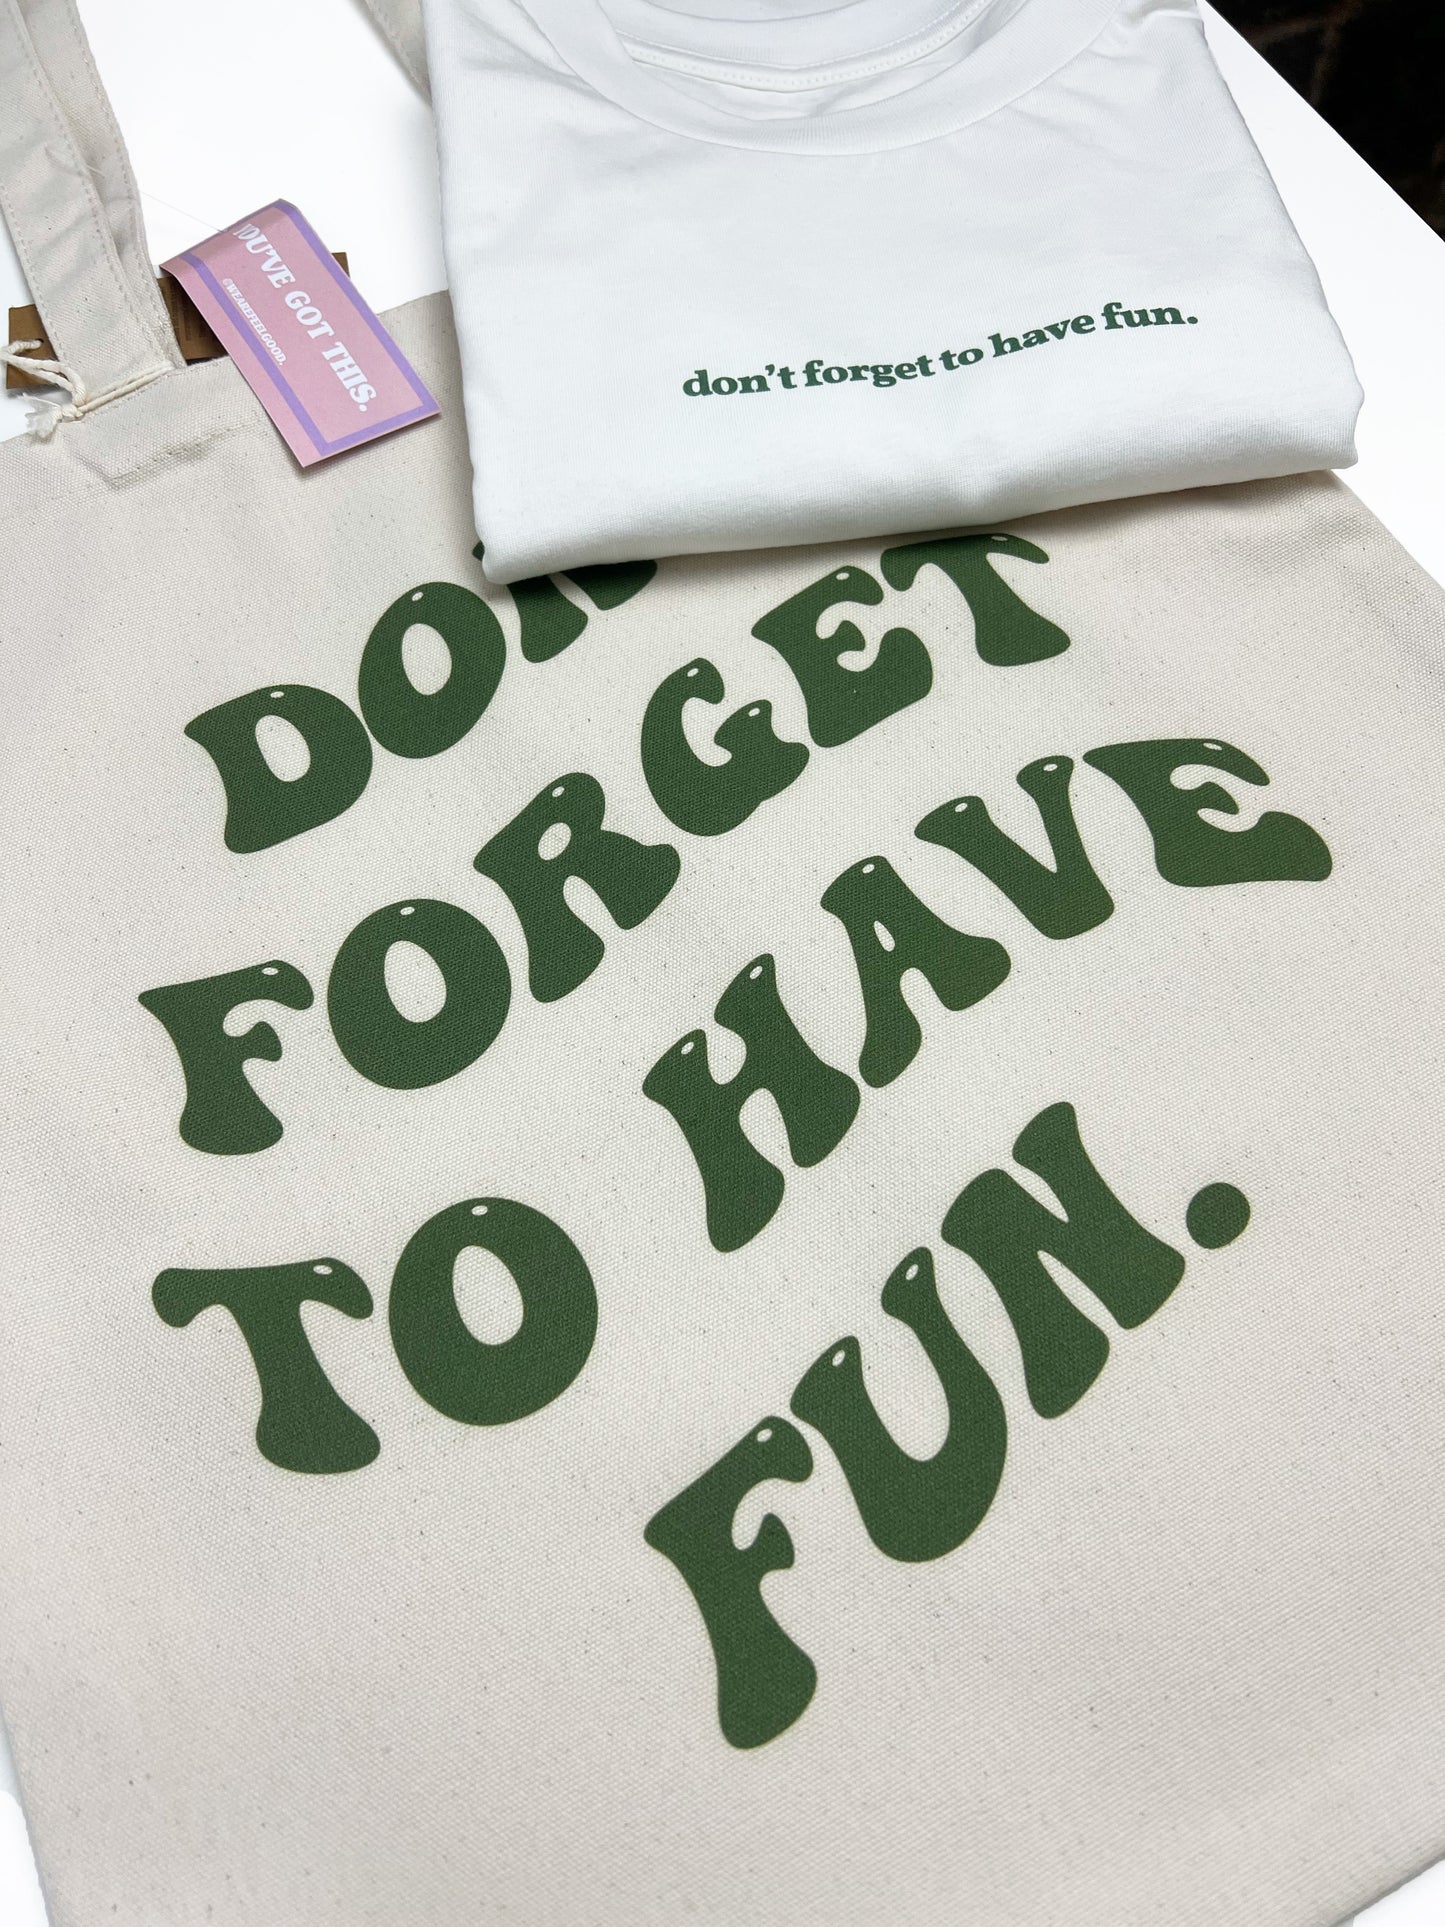 Don't forget to have fun- Tote bag